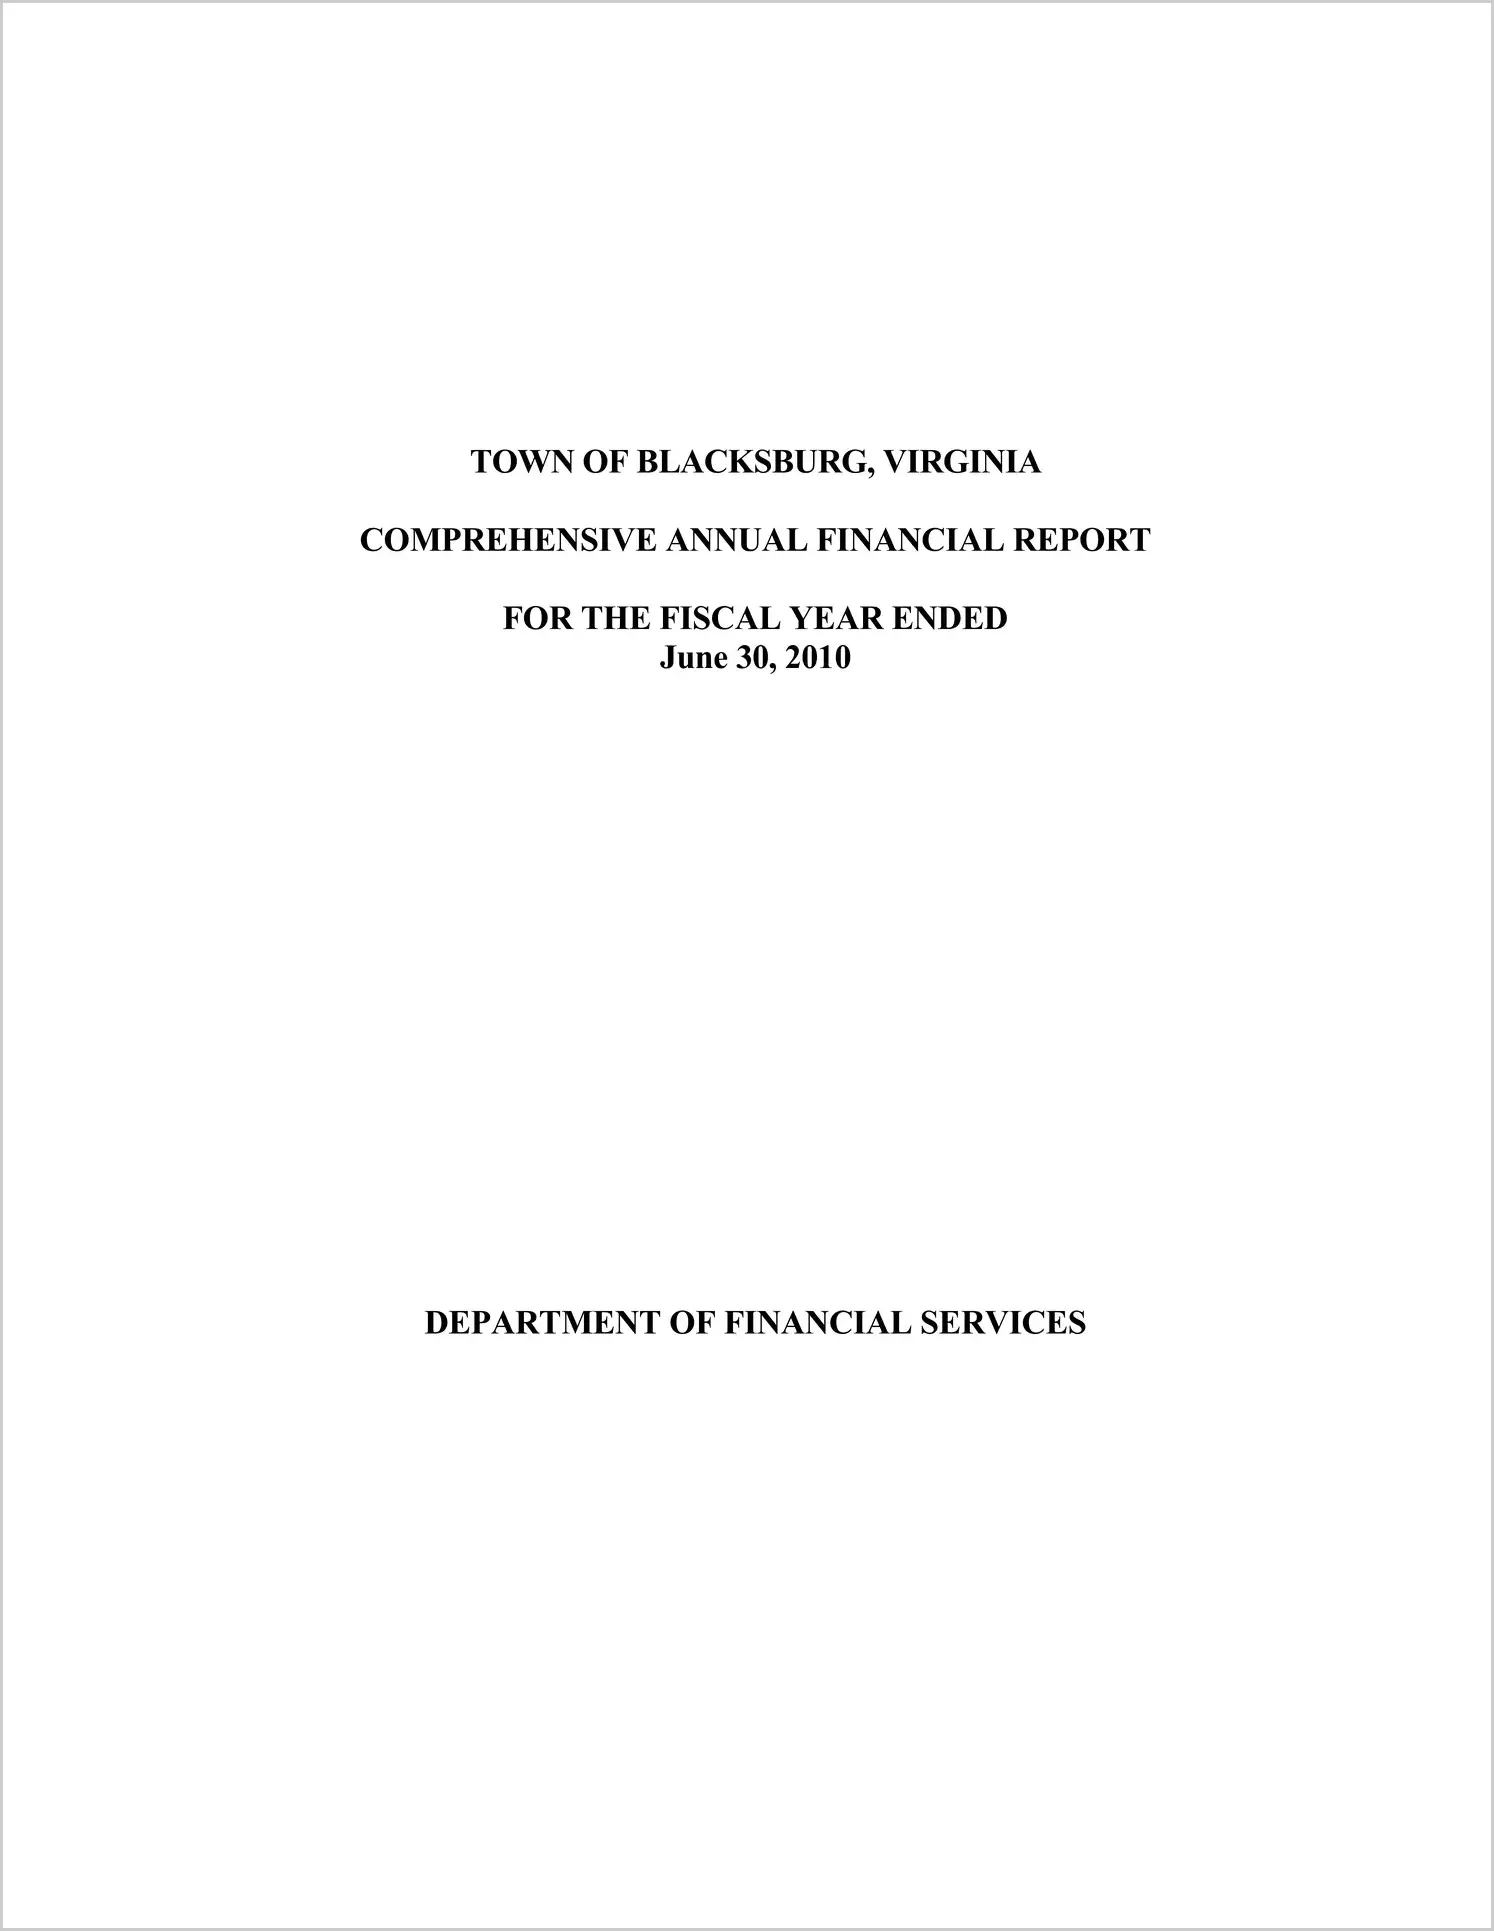 2010 Annual Financial Report for Town of Blacksburg